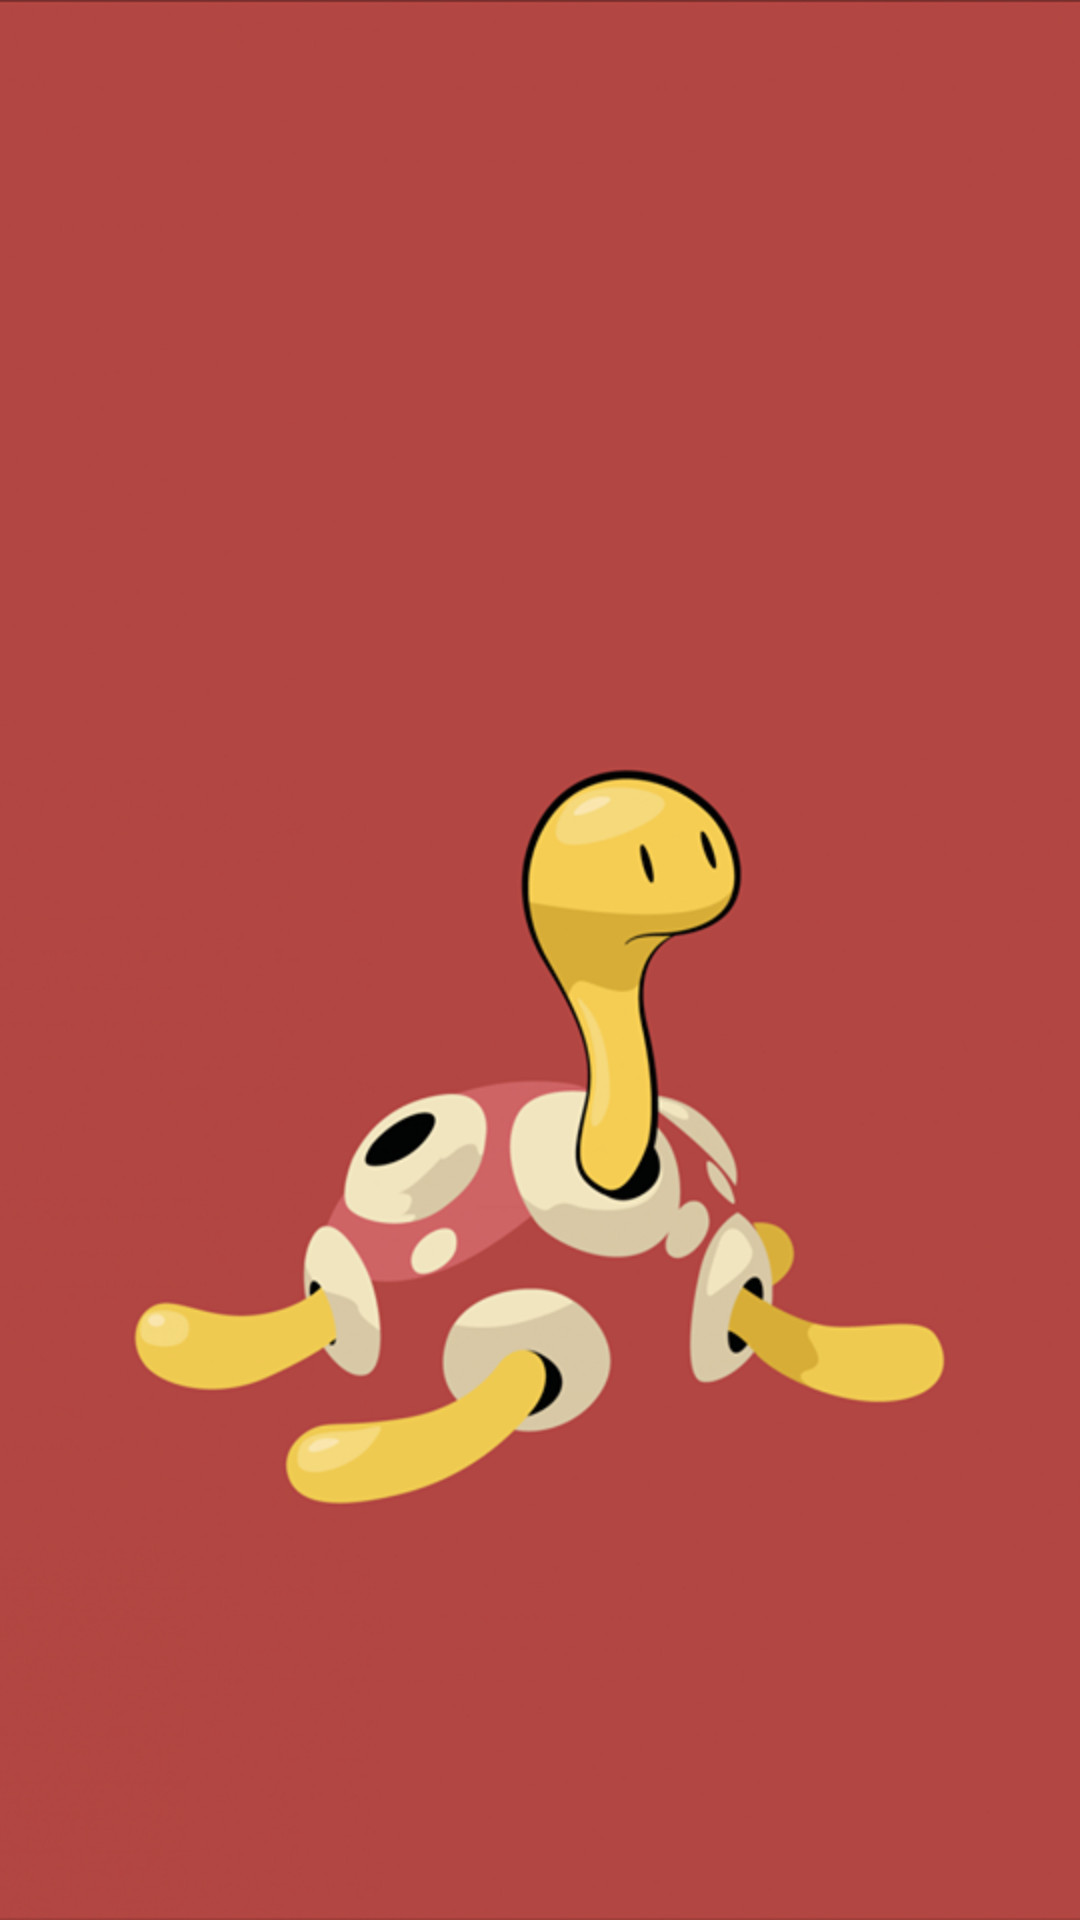 1080x1920 Shuckle - Tap to see more of the cutest cartoon characters wallpapers! -  @mobile9